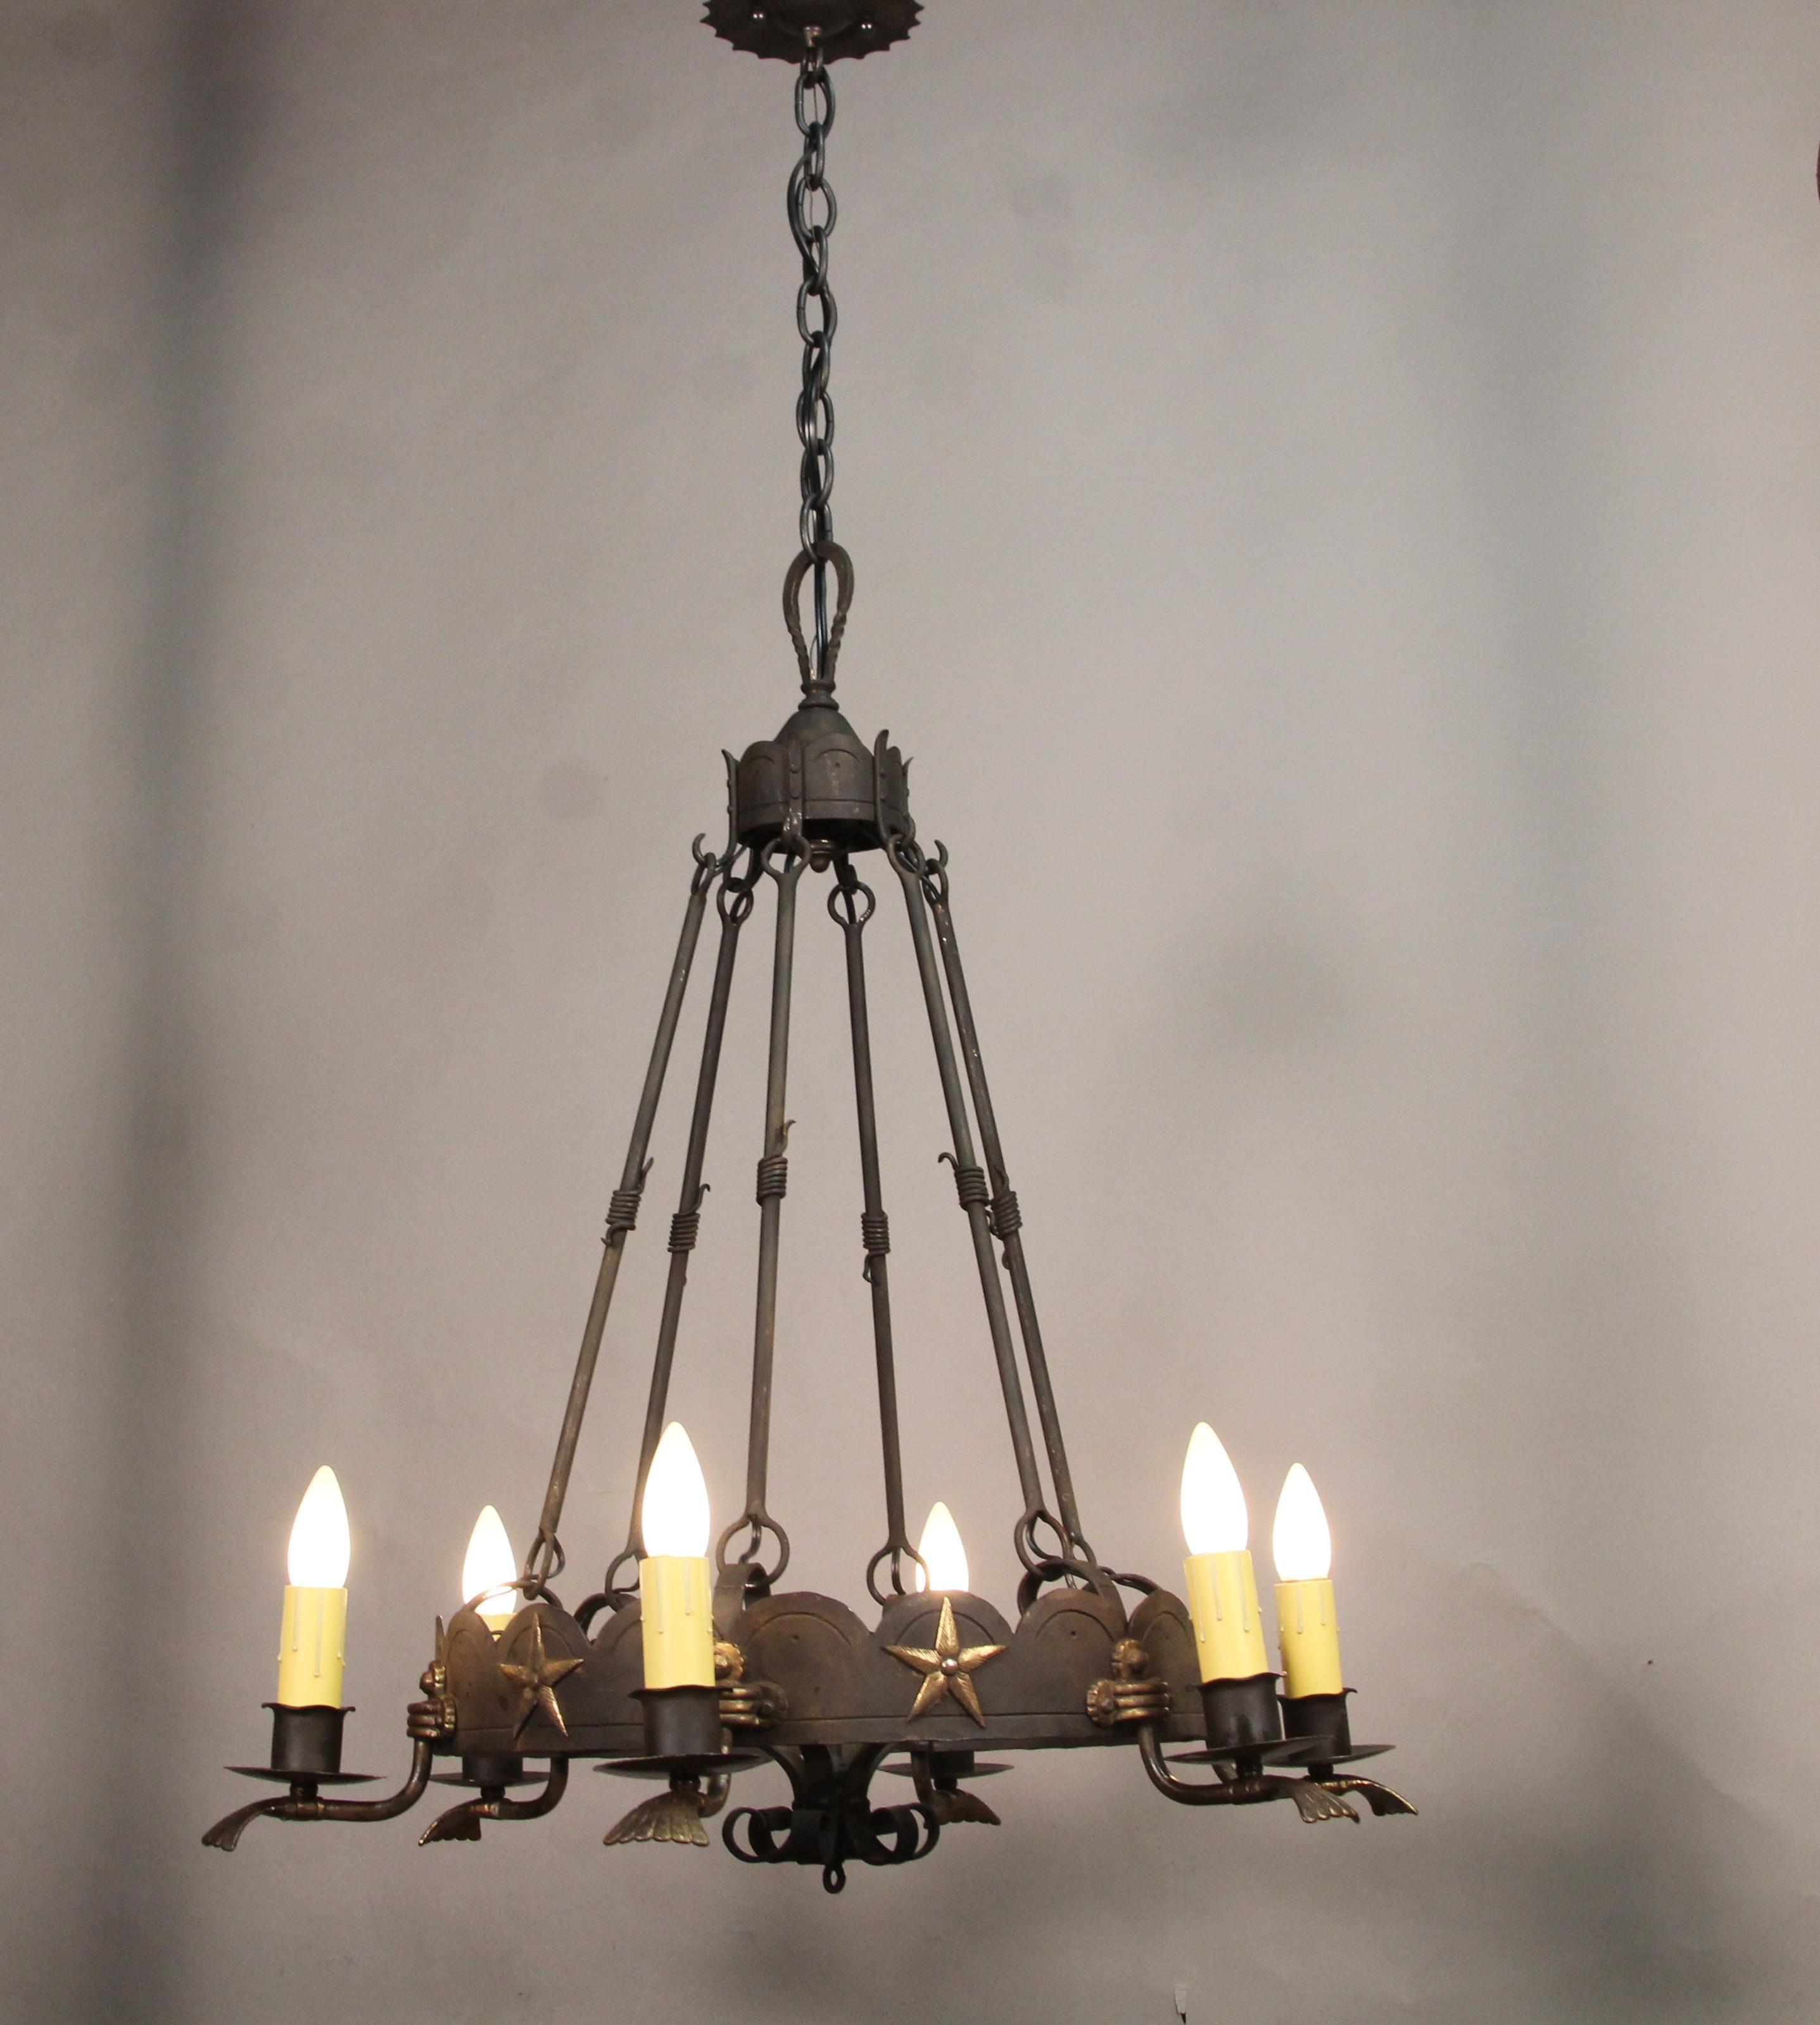 Chandelier with six lights and star patterned, circa 1920s. Bronze and iron.
Measures: 27 